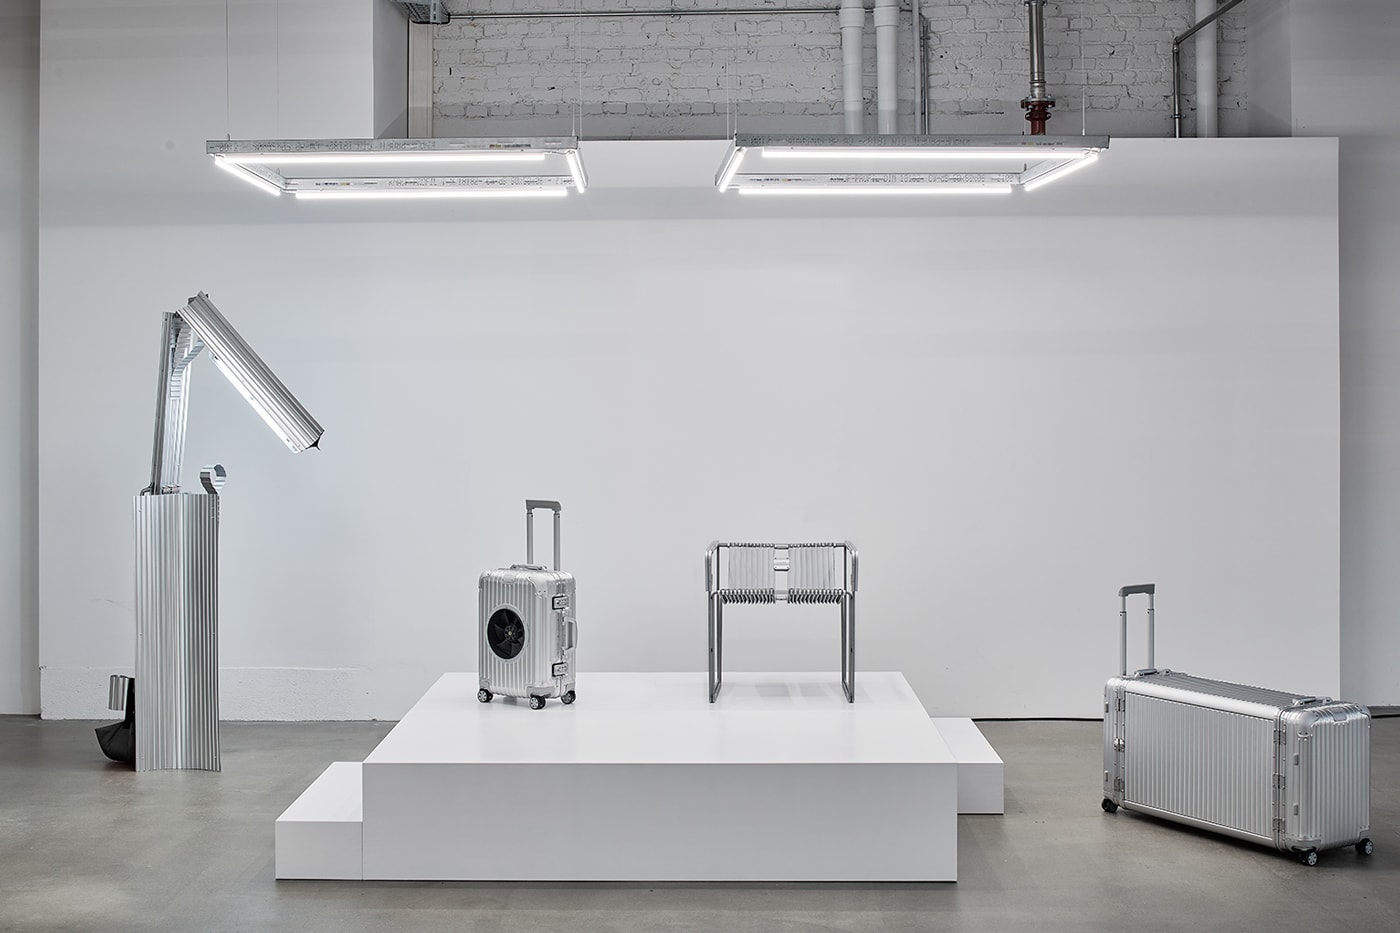 NEW TENDENCY Unveils Rimowa “As Seen By” Installation at Kant Garagen Berlin